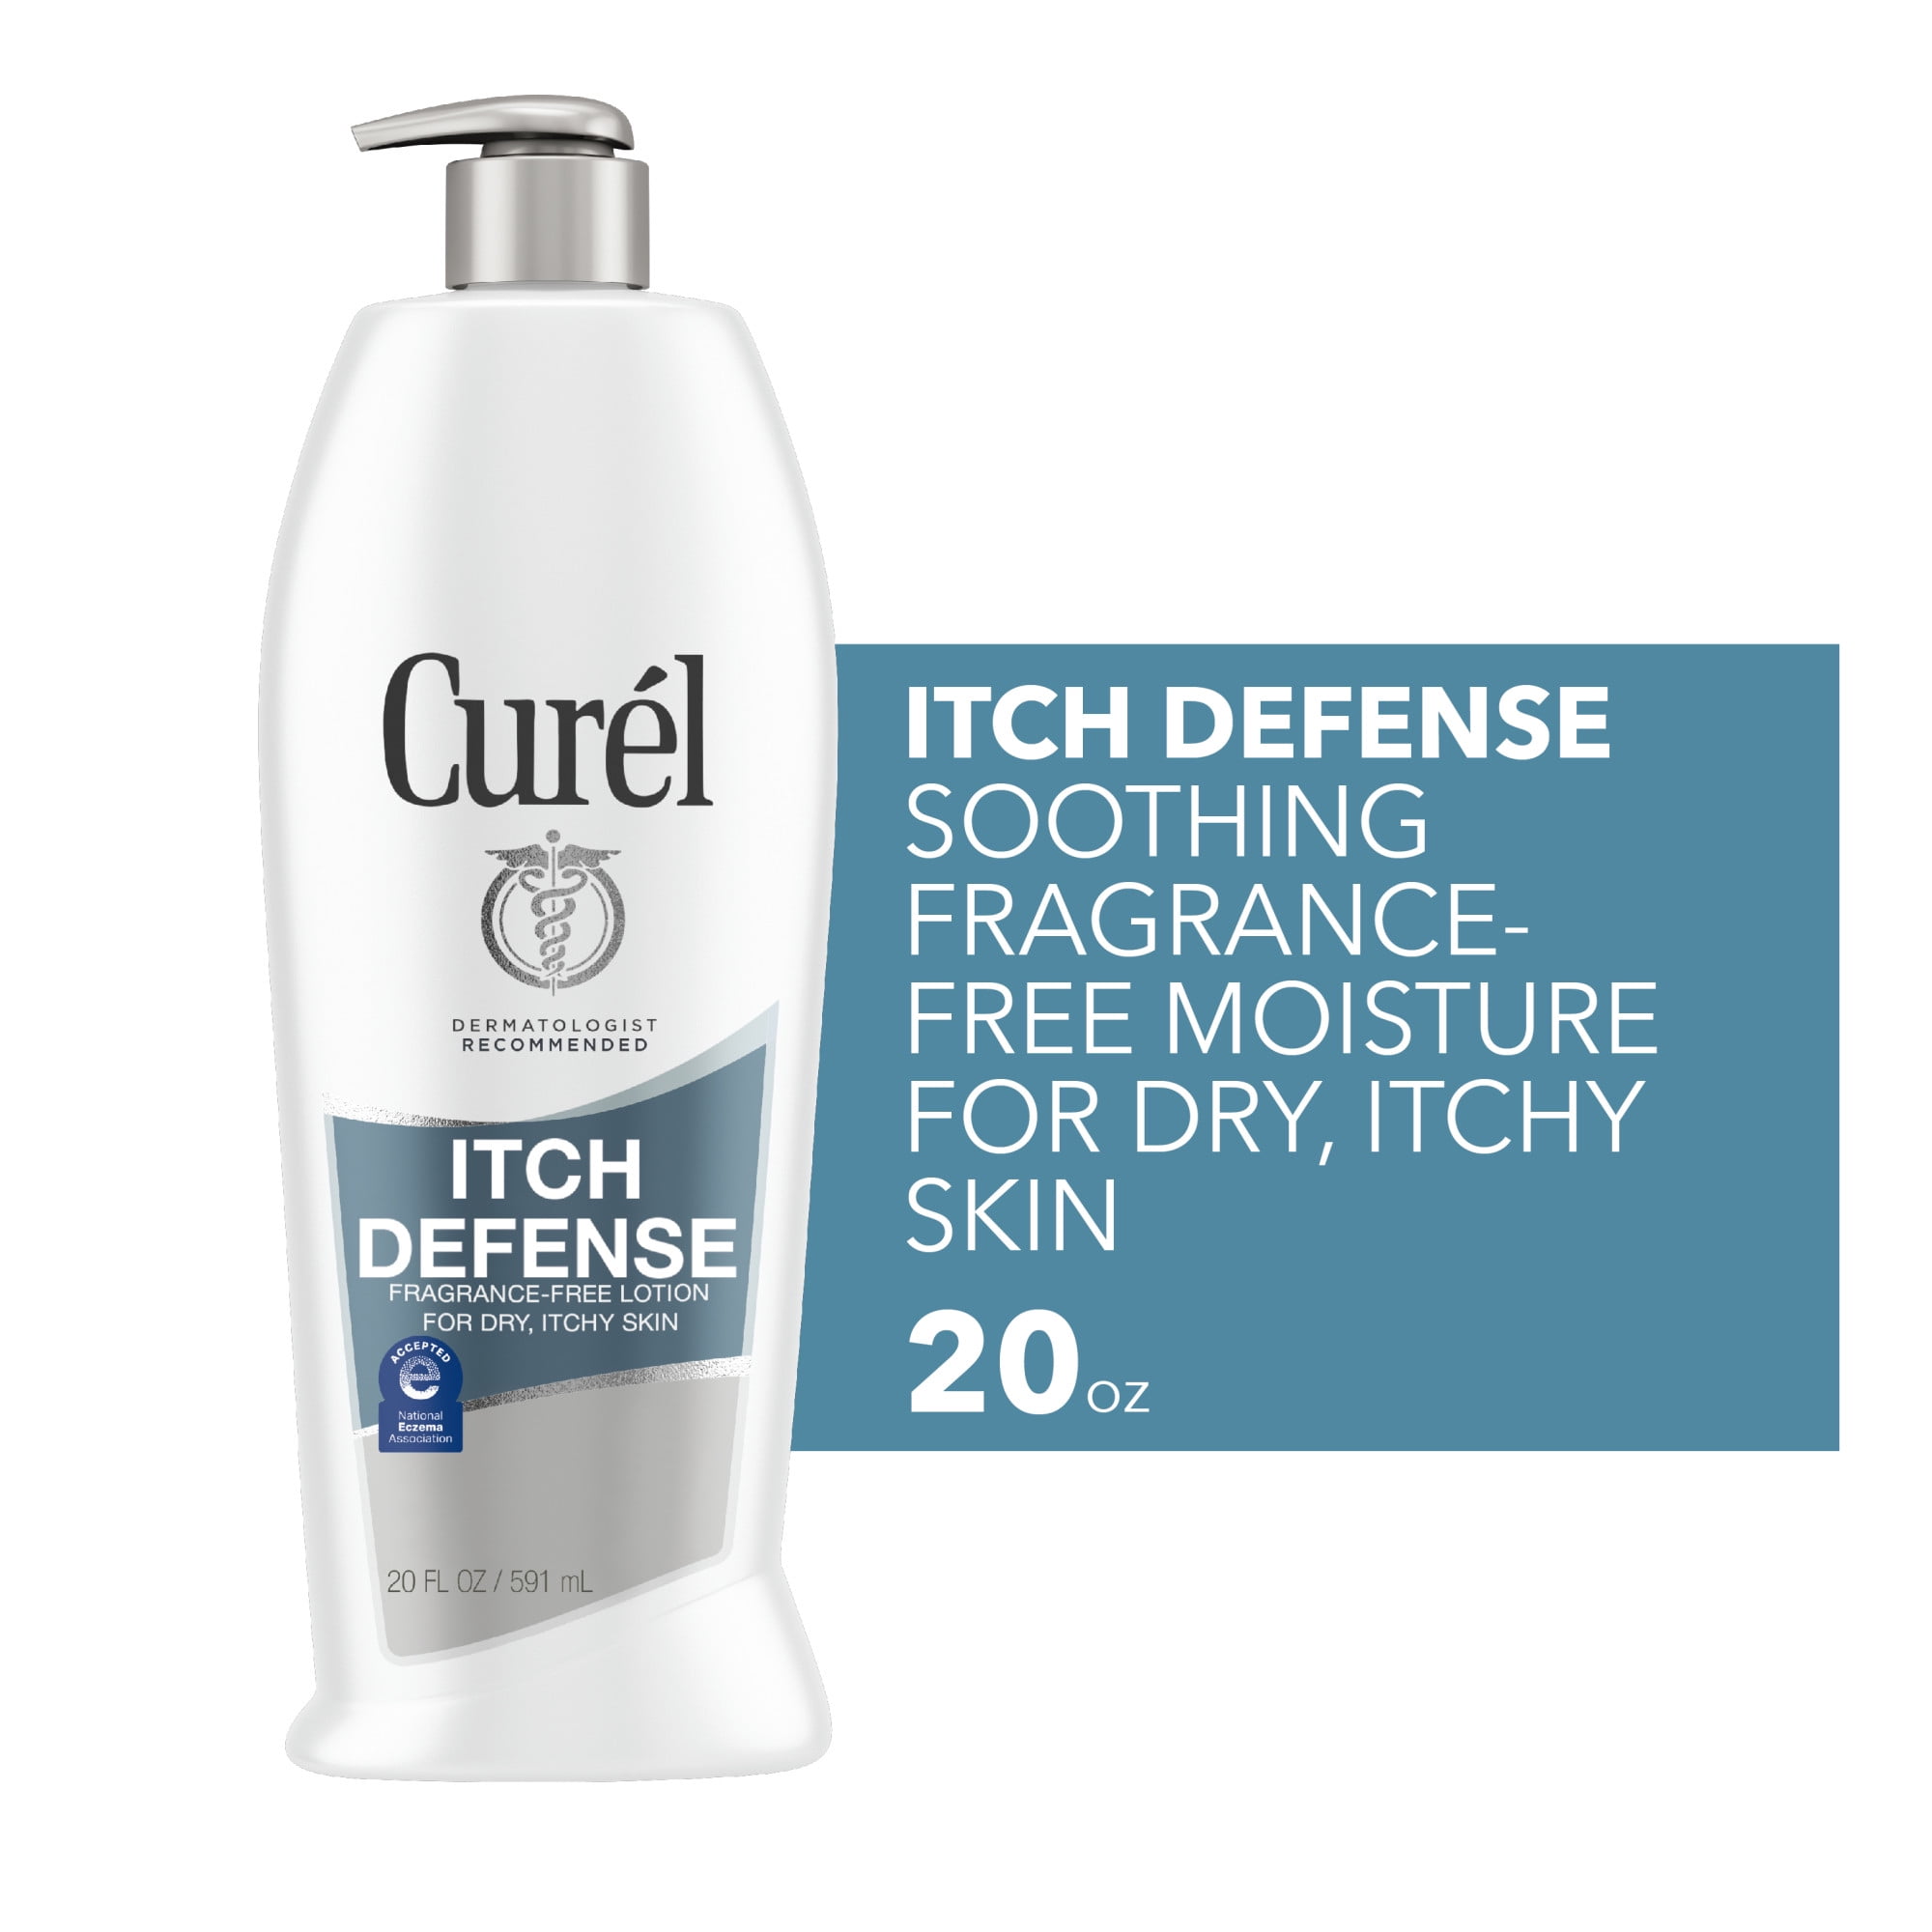 Curel Itch Defense Calming Body and Hand Lotion for Dry, Itchy Skin, 20 fl oz